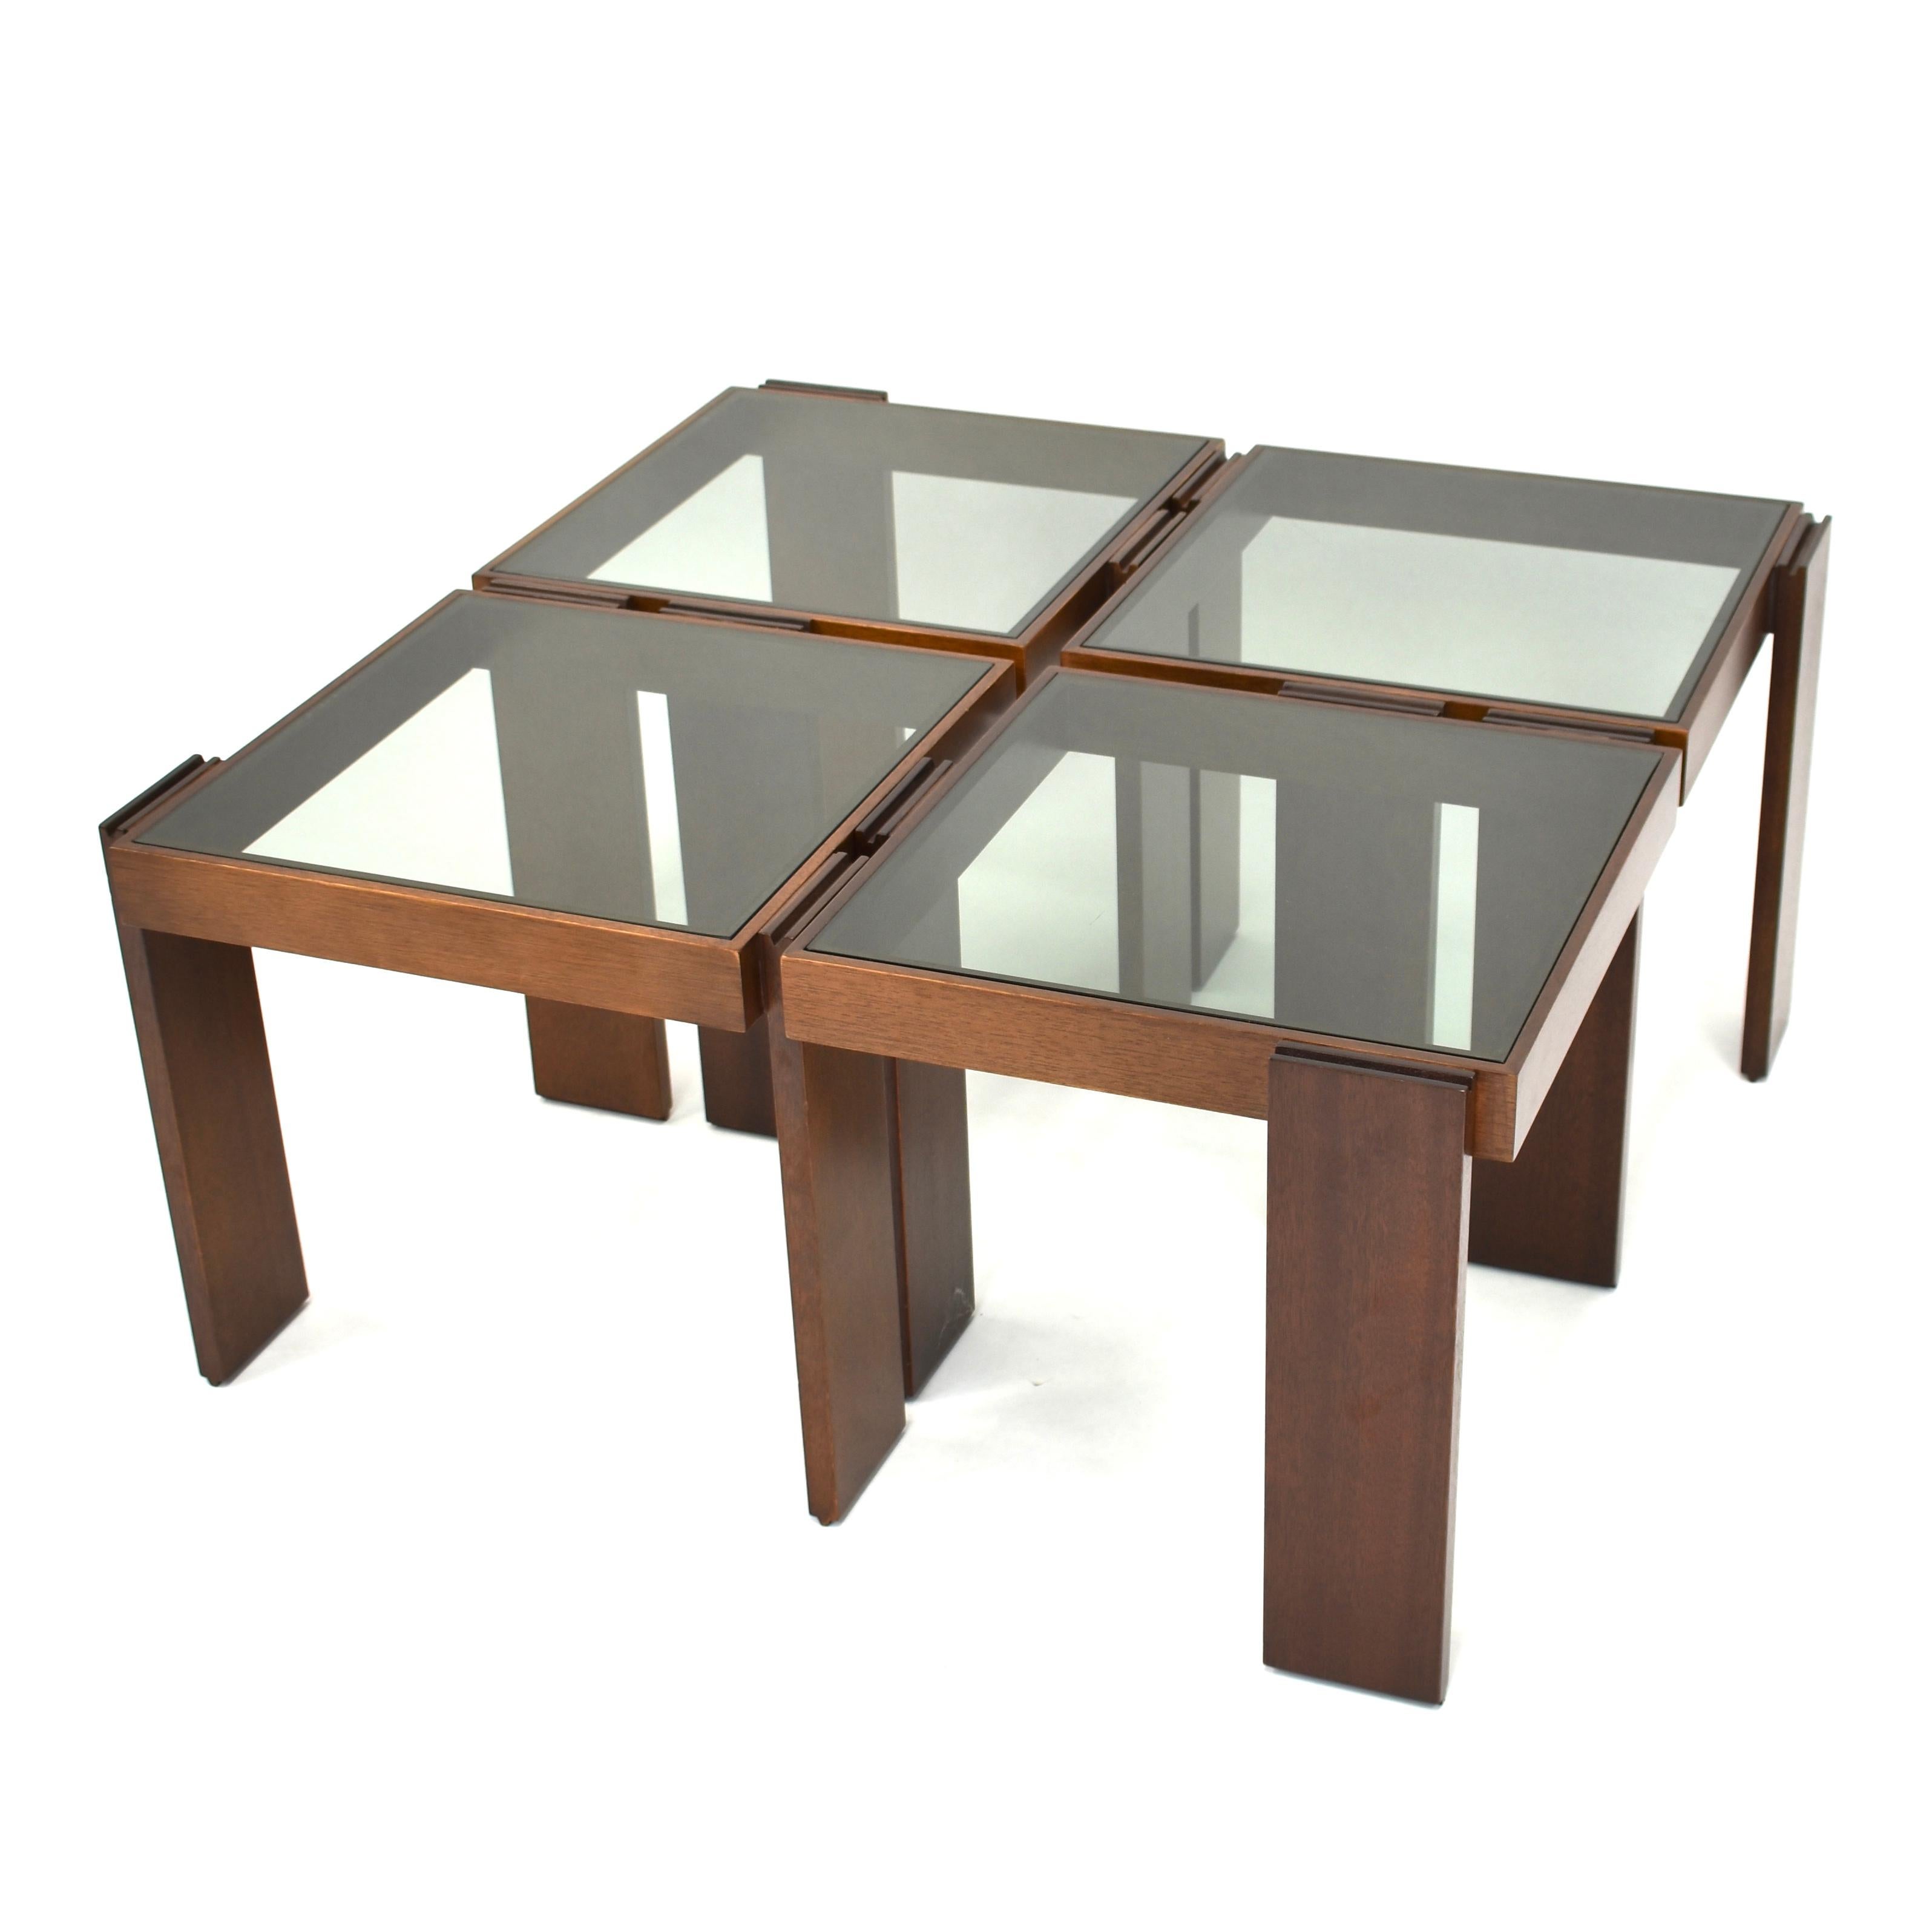 Cool set of four coffee tables. The tables can be arranged in various ways (Squared, L-shaped, S-shaped, etc.) They can also be stacked on top of each other to create a showcase.
These coffee tables has many options in your living room such as a